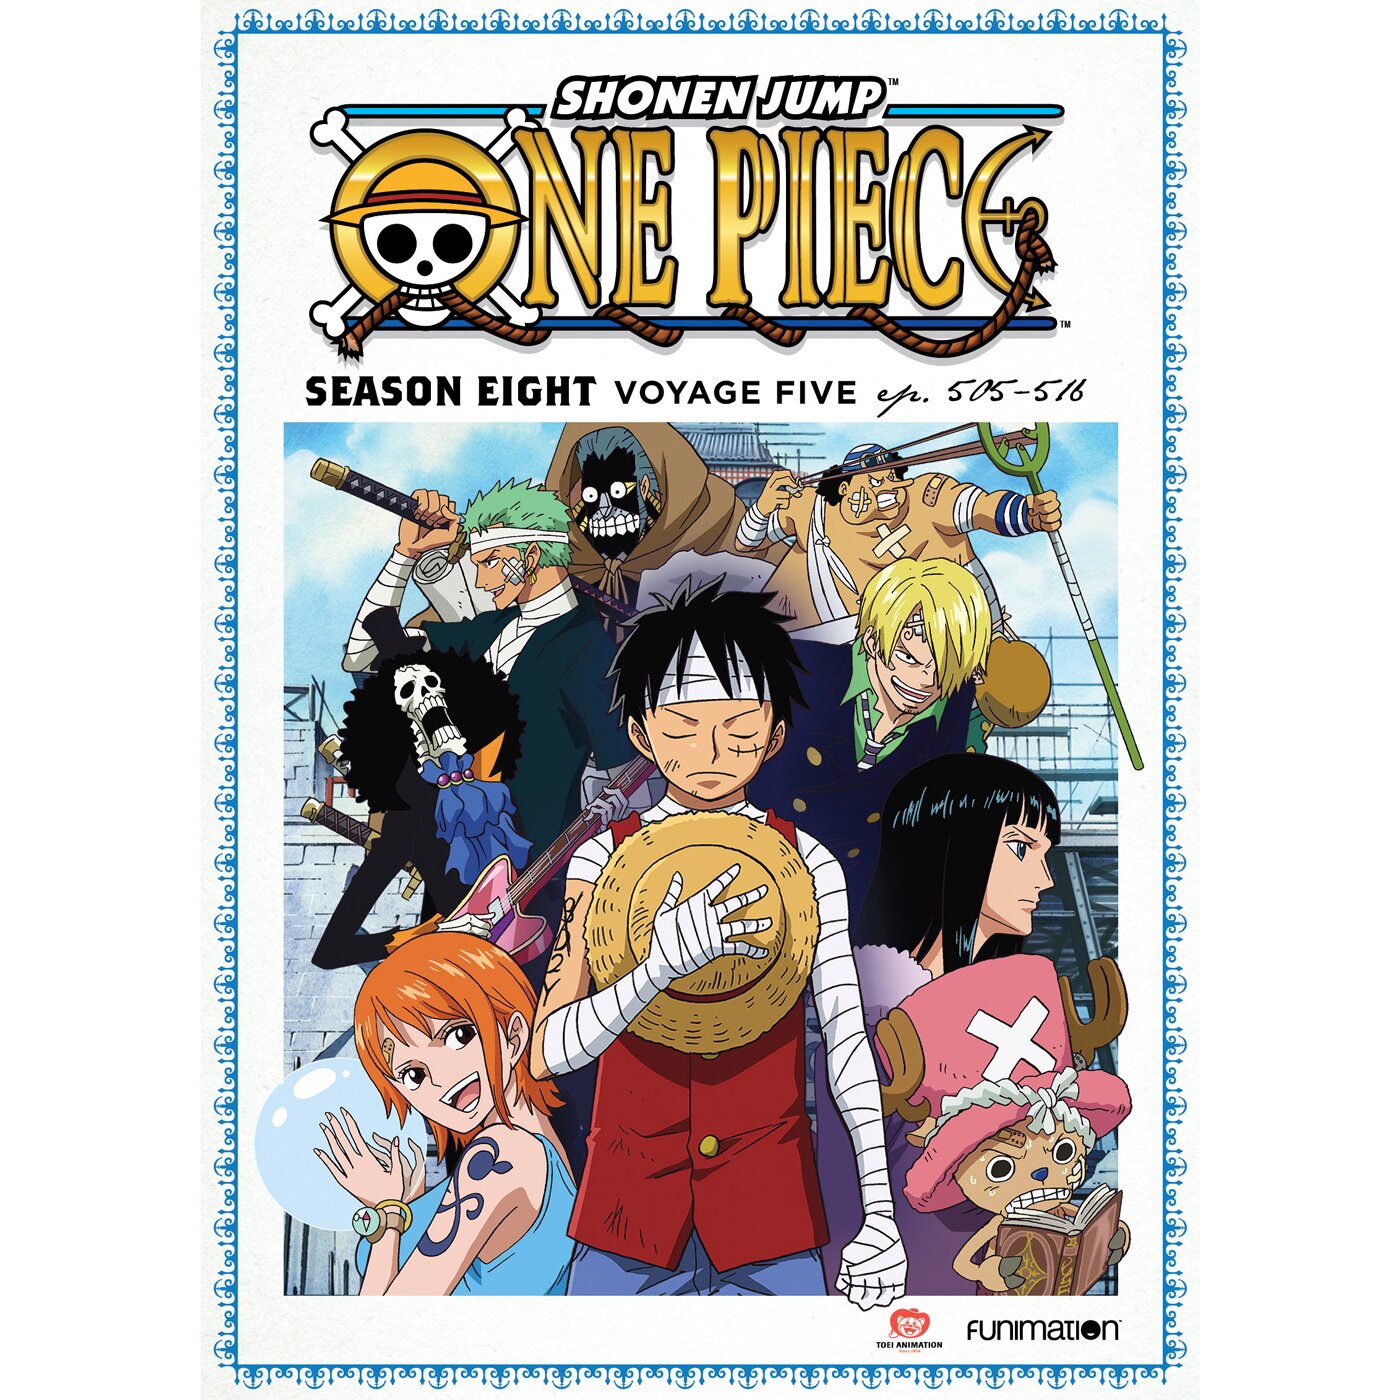 One Piece: A Voyage Through The World's Favorite Manga - Toons Mag